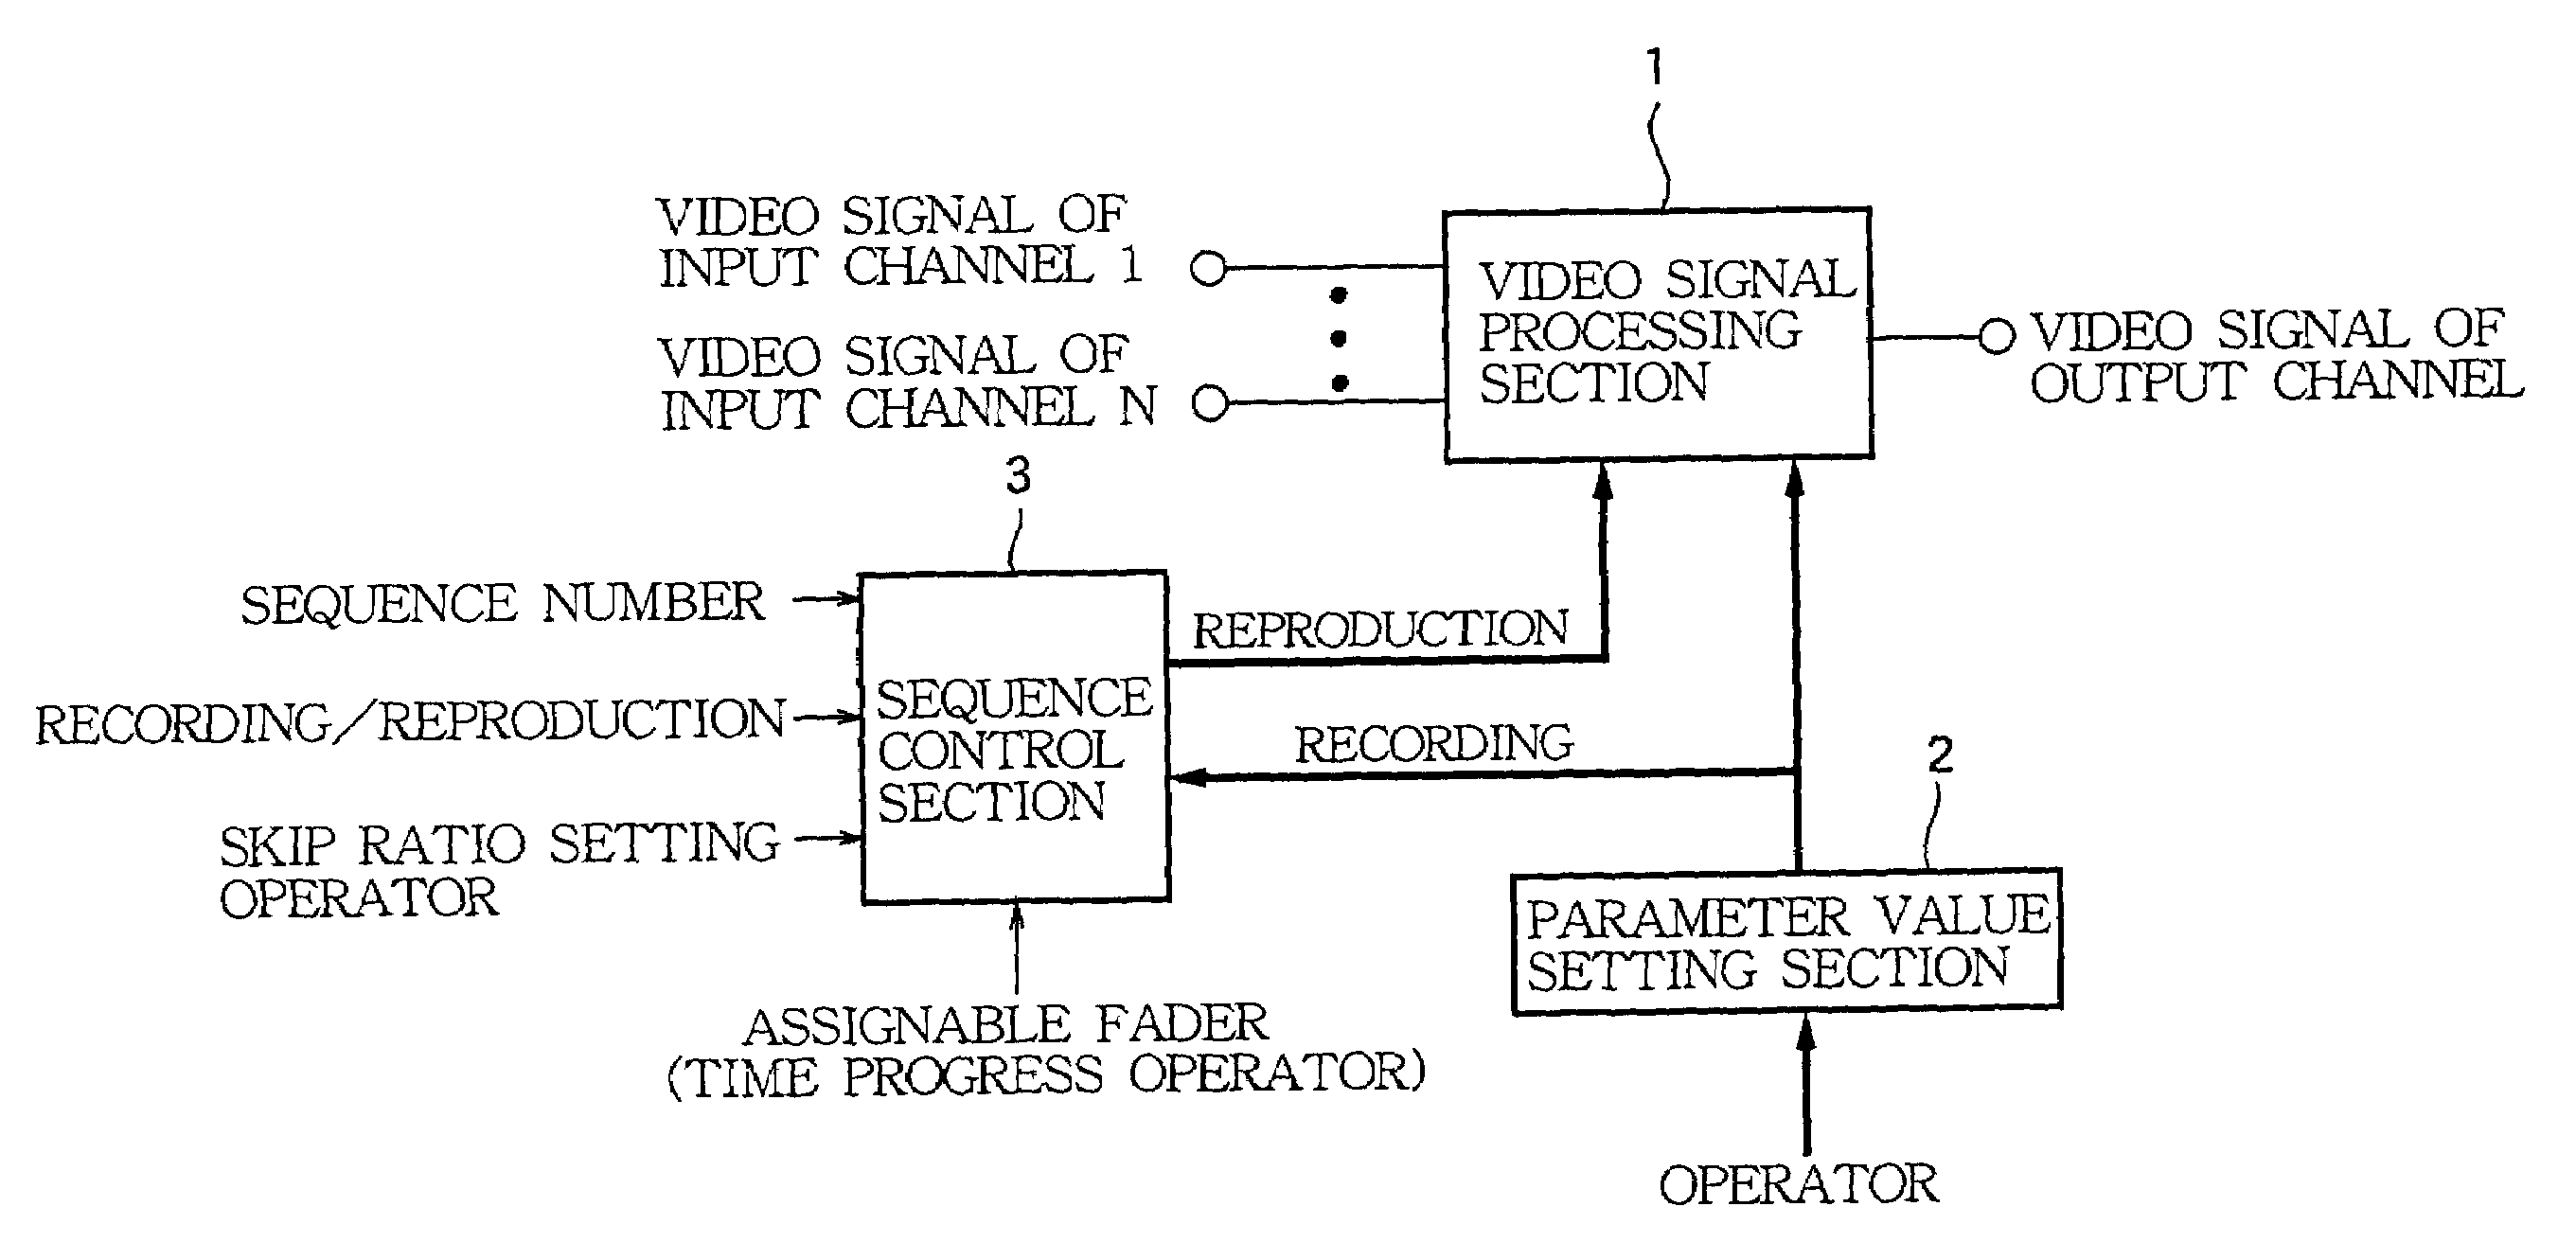 Multi-channel video mixer for applying visual effects to video signals